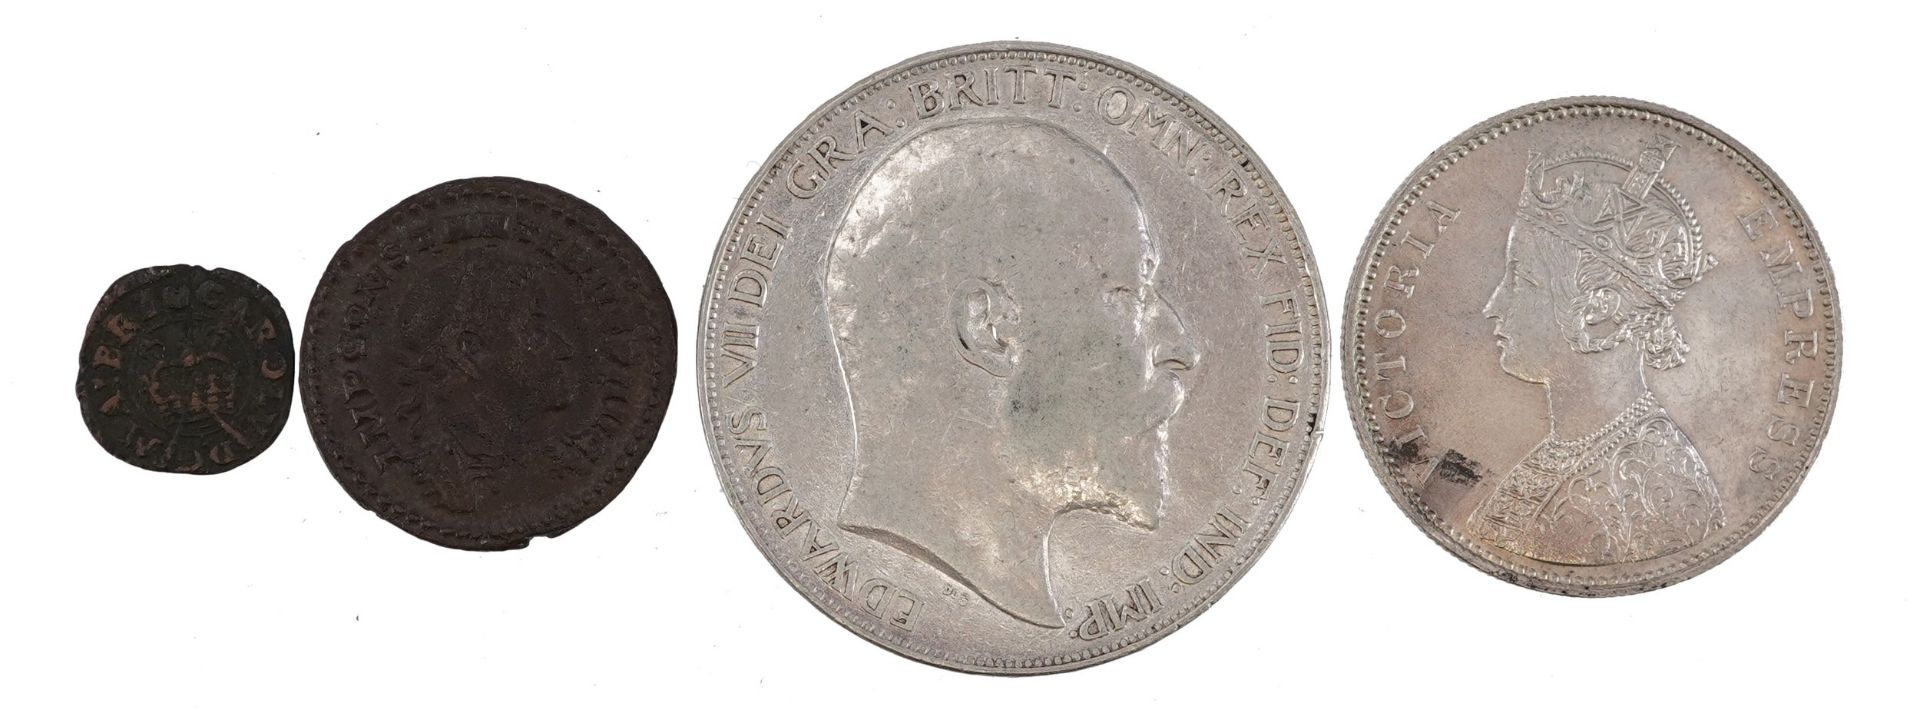 Antiquarian and later coinage including Edward VII 1902 crown and 1879 Indian one rupee - Image 2 of 2